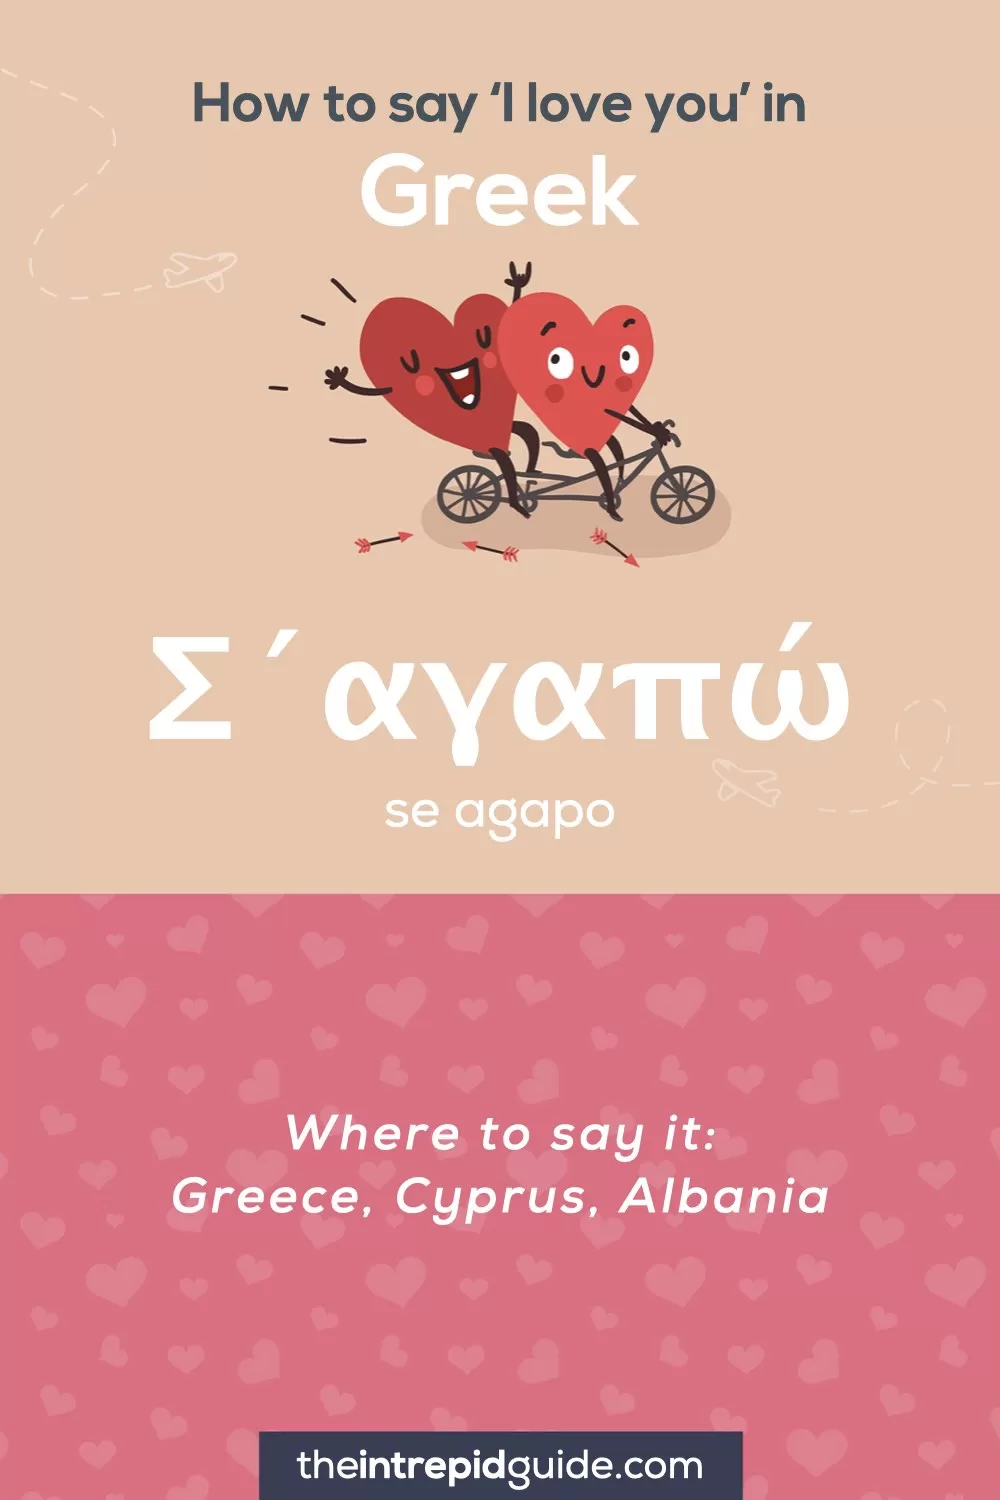 How to say I love you in different languages - Greek - Σ΄αγαπώ